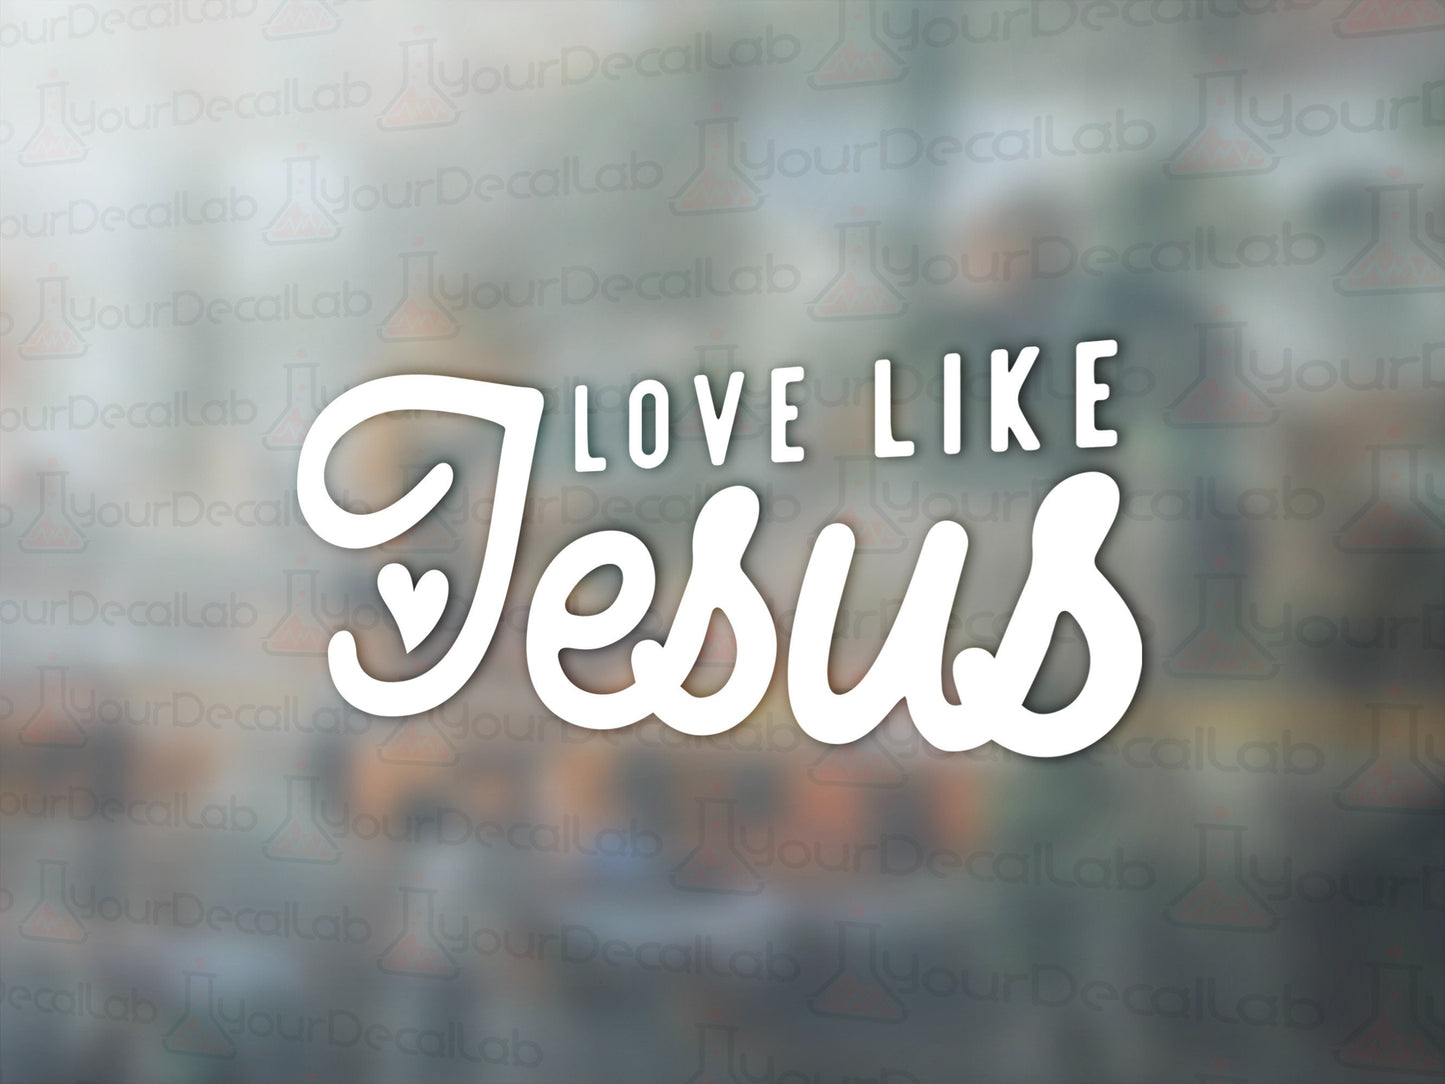 Love Like Jesus Decal - Many Colors & Sizes